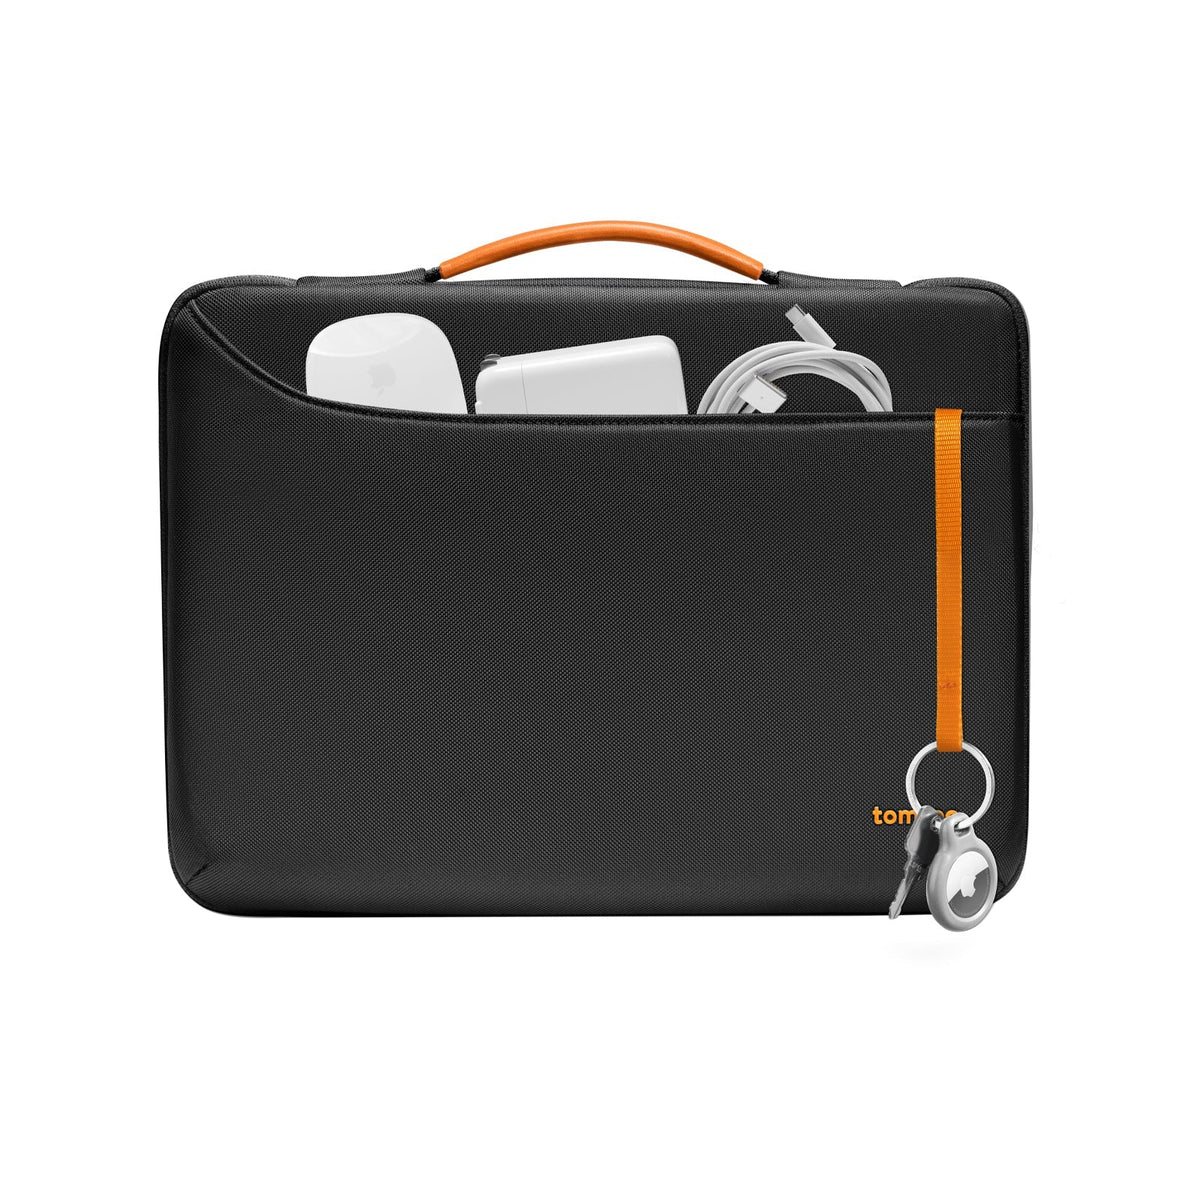 secondary_Defender-A22 Laptop Briefcase For 16-inch MacBook Pro